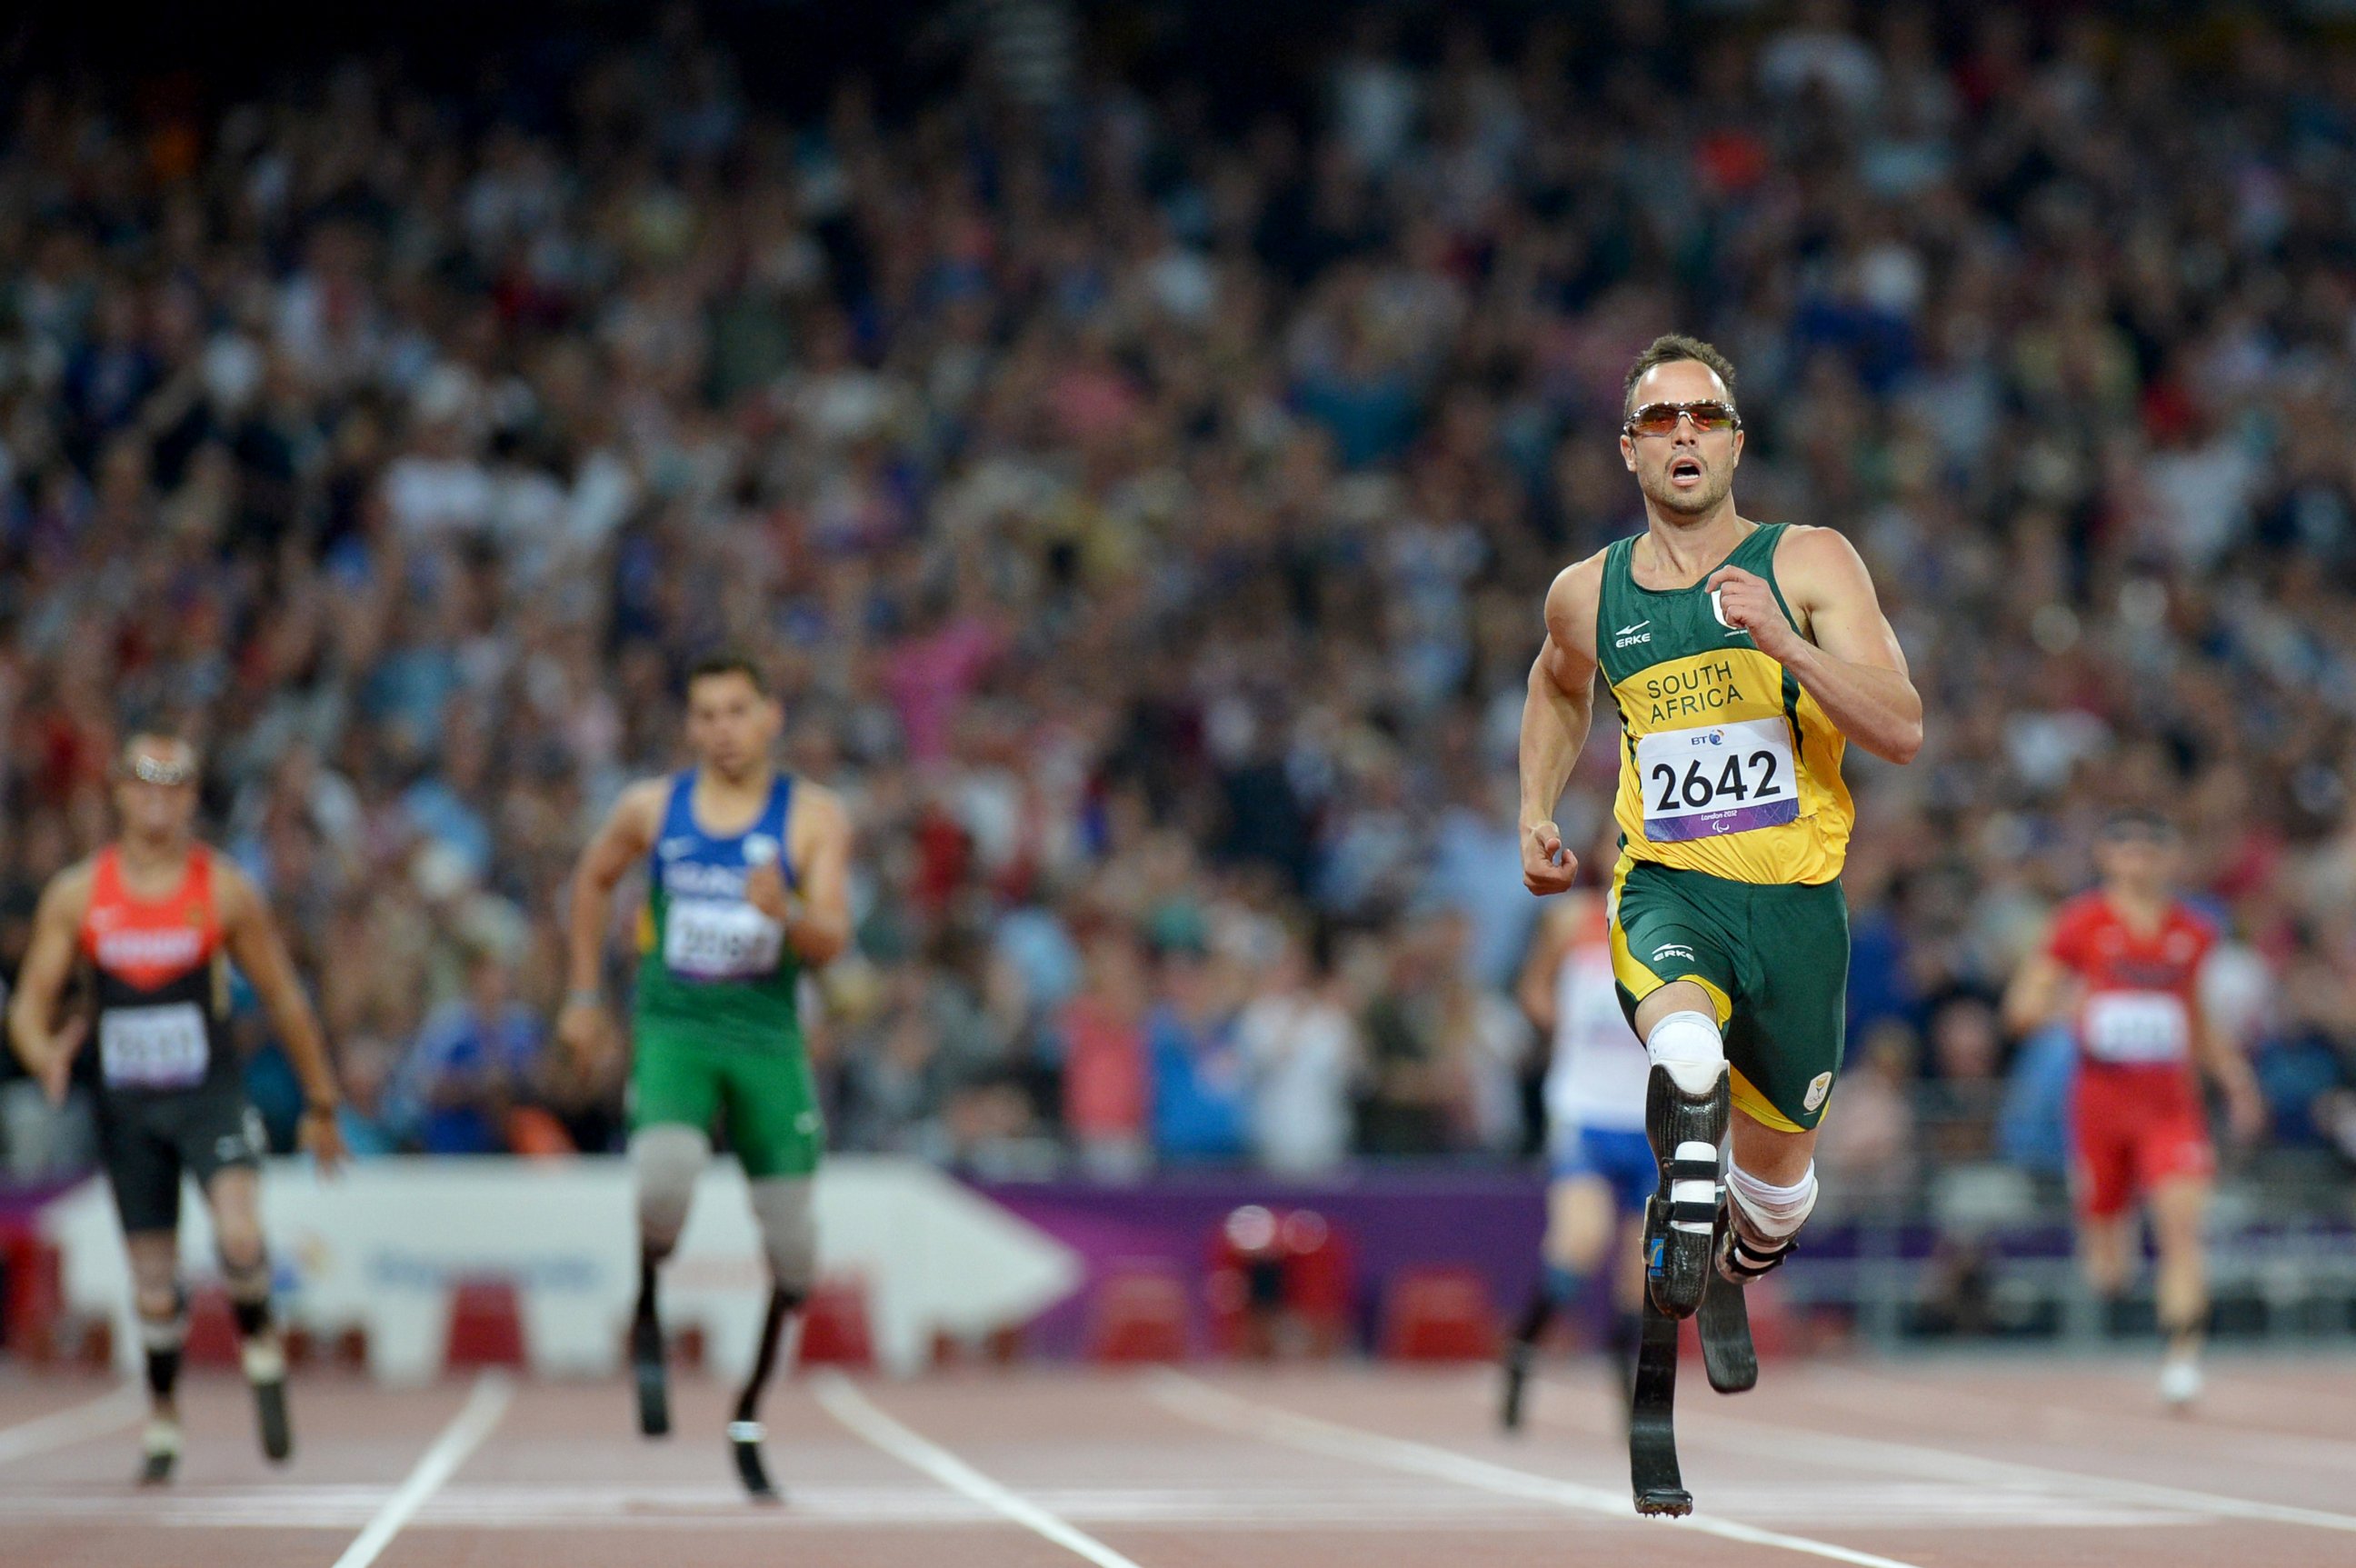 PHOTO: South Africa's Oscar Pistorius in the men's 400m - T44 final at the London 2012 Paralympic Games at the Olympic Stadium in London, Sept. 8, 2012.